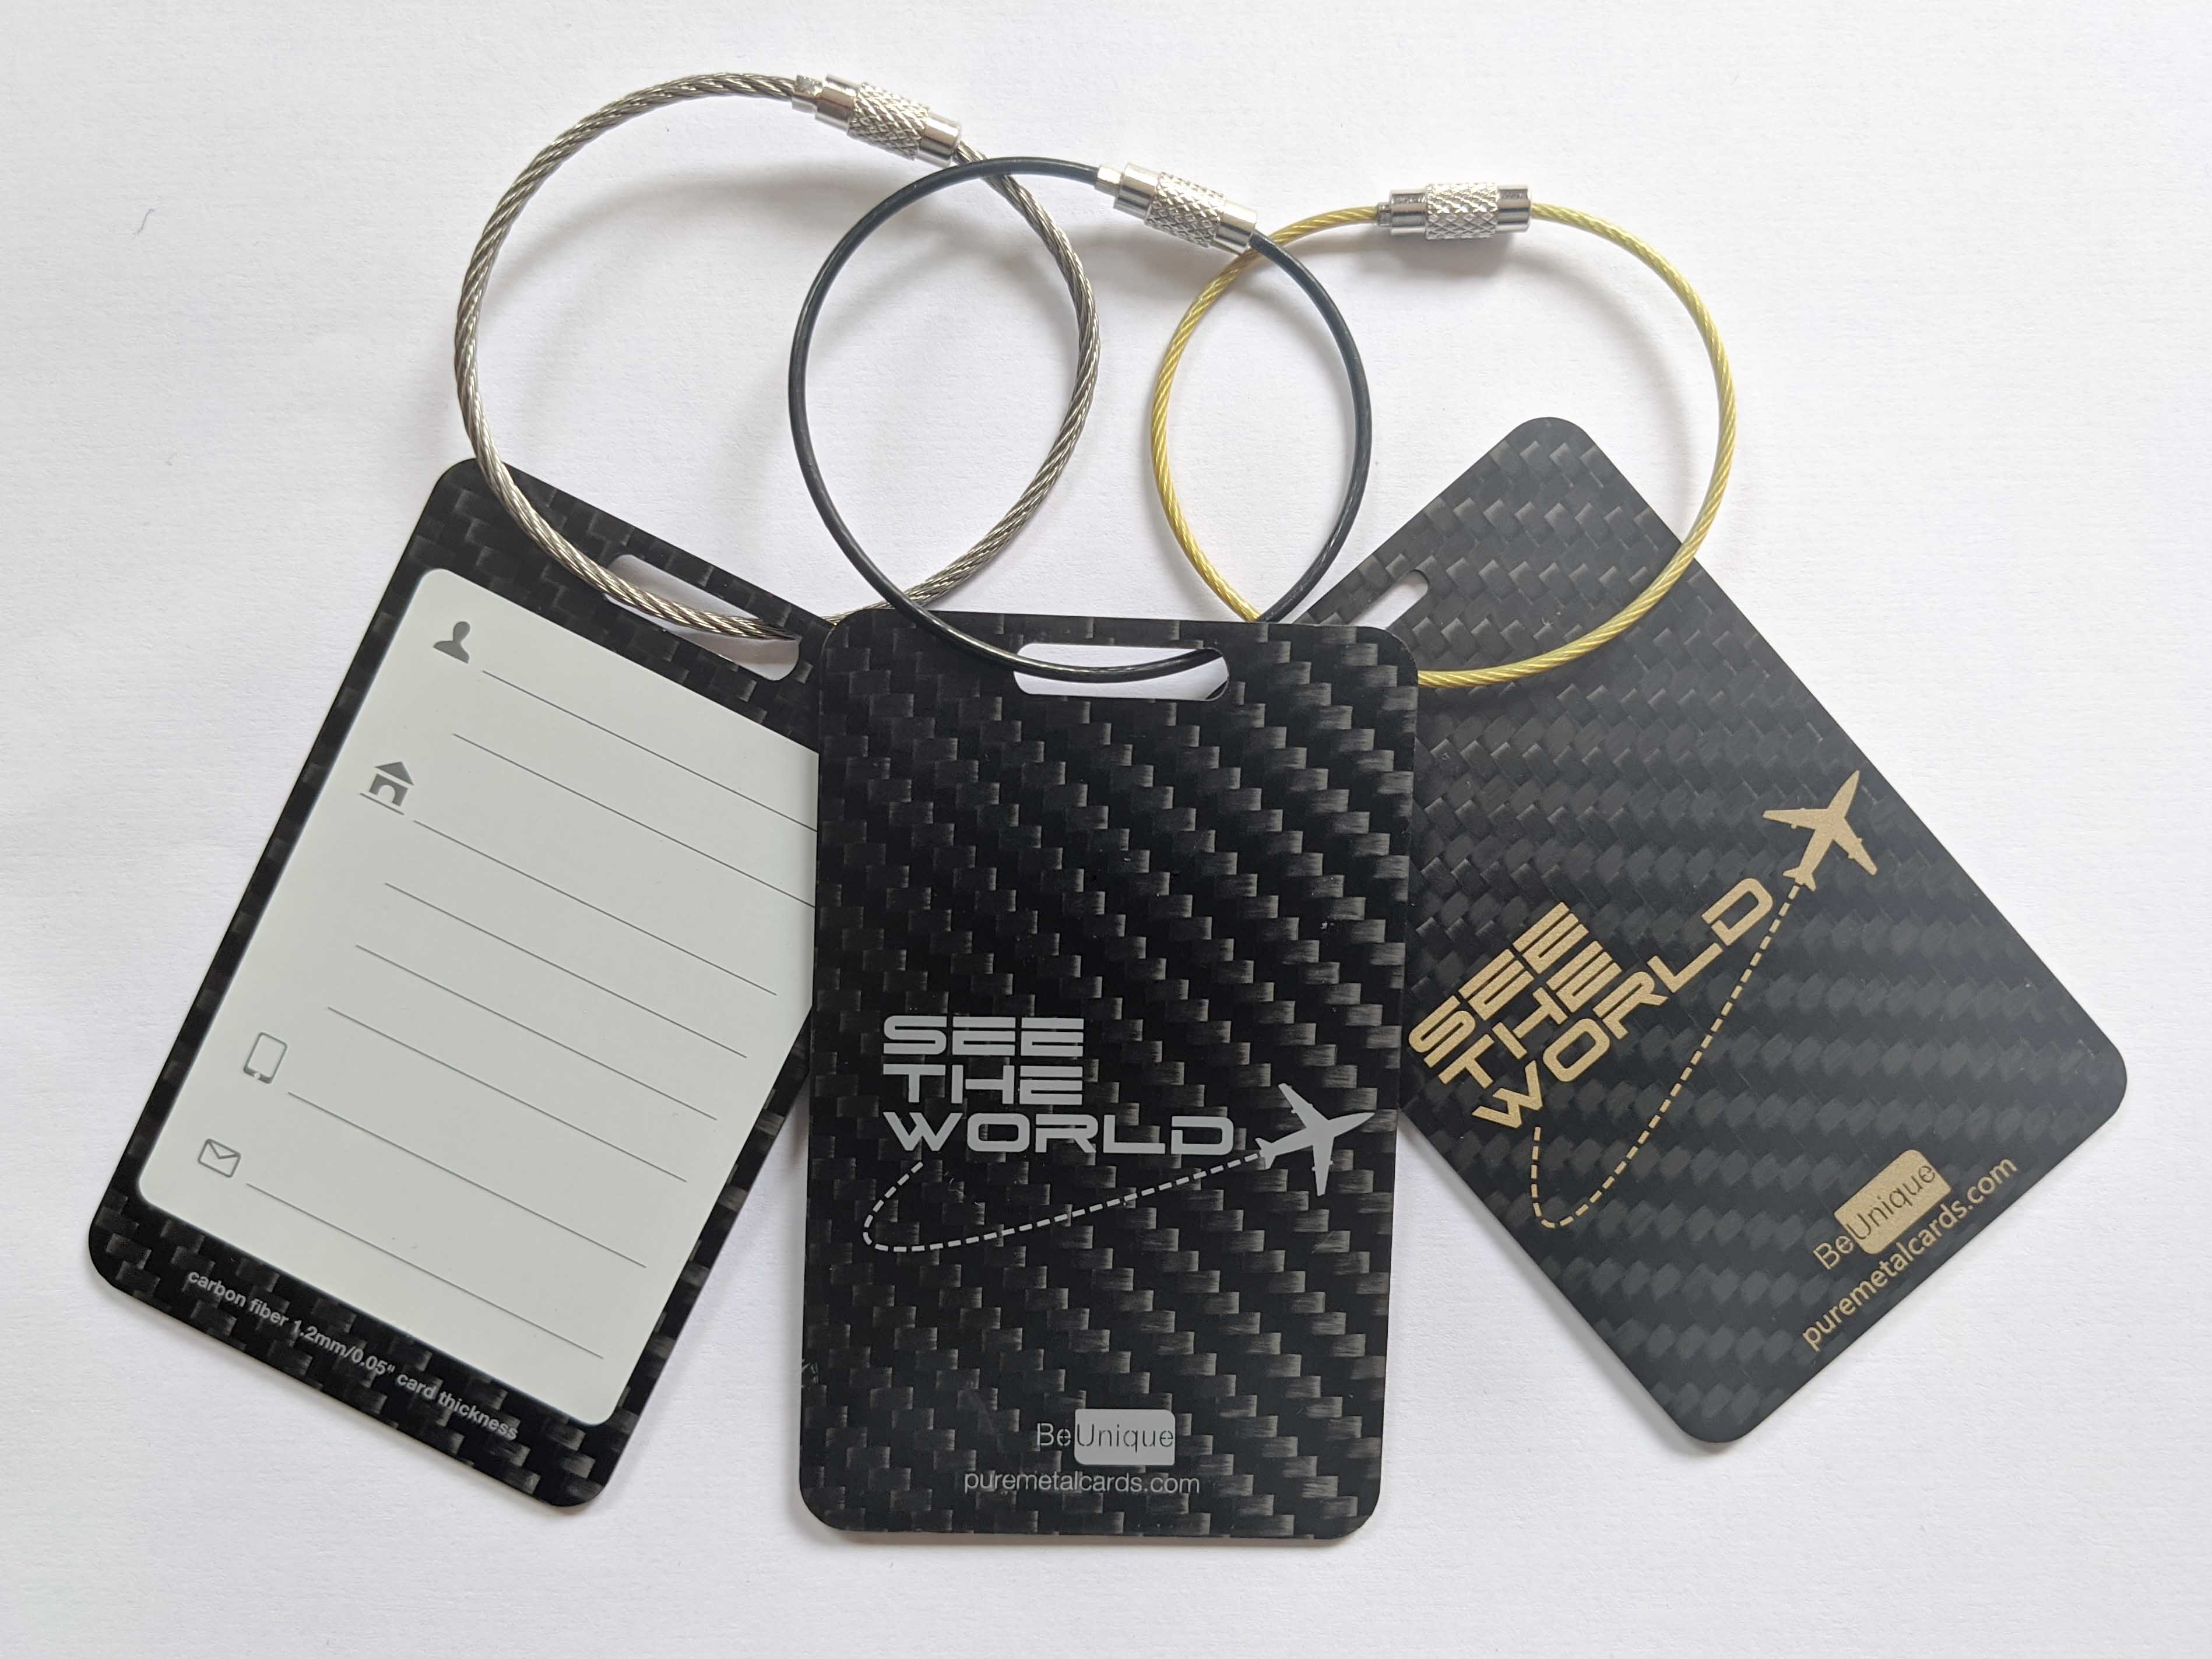 Pure Metal Cards carbon fiber luggage tag